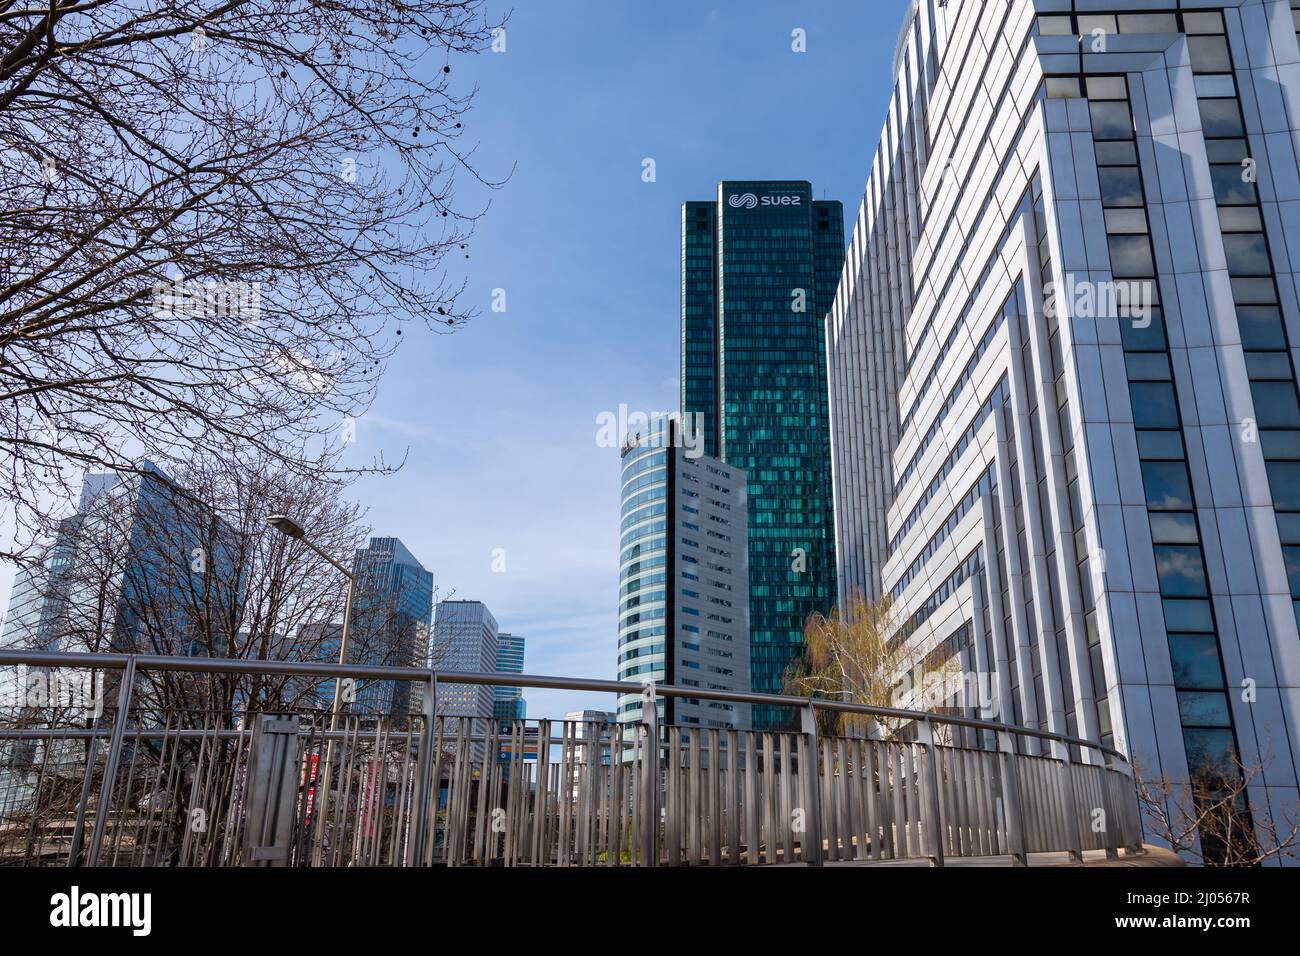 Exterior view of the tower housing the headquarters of Suez, a French water and waste management group, located in Paris-La Defense Stock Photo